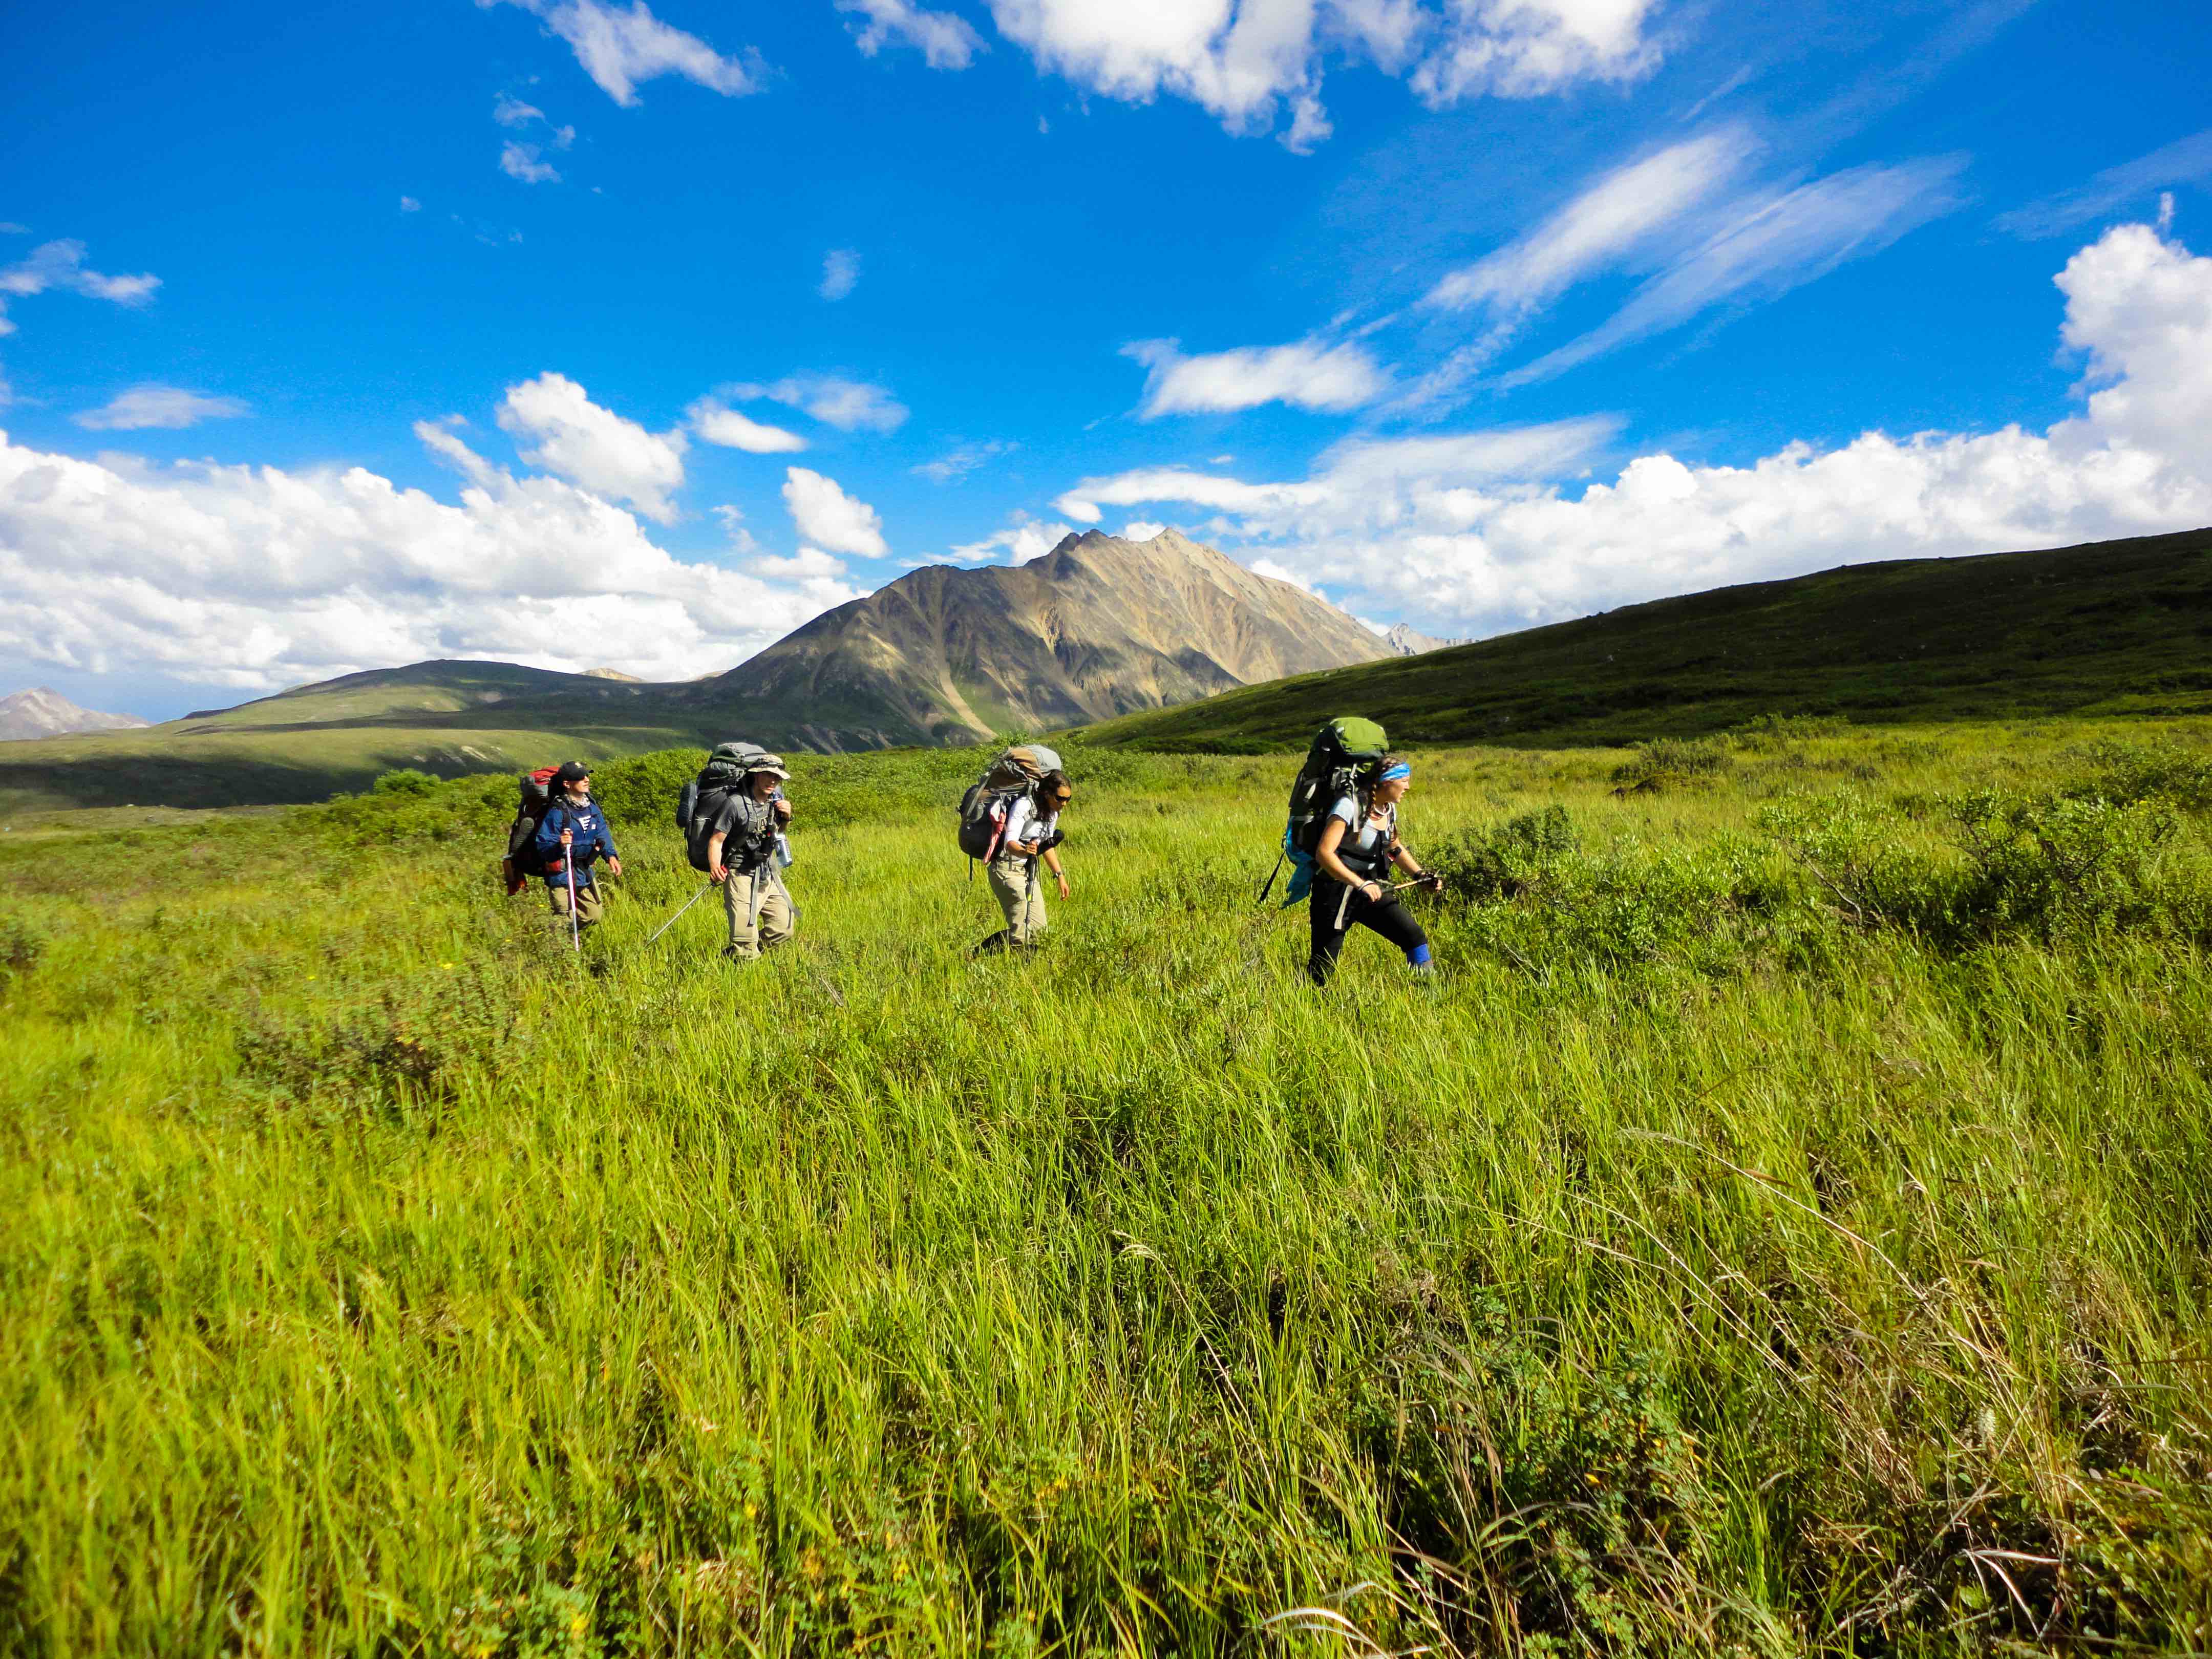 Group of four backpackers crossing a meadow in Alaska